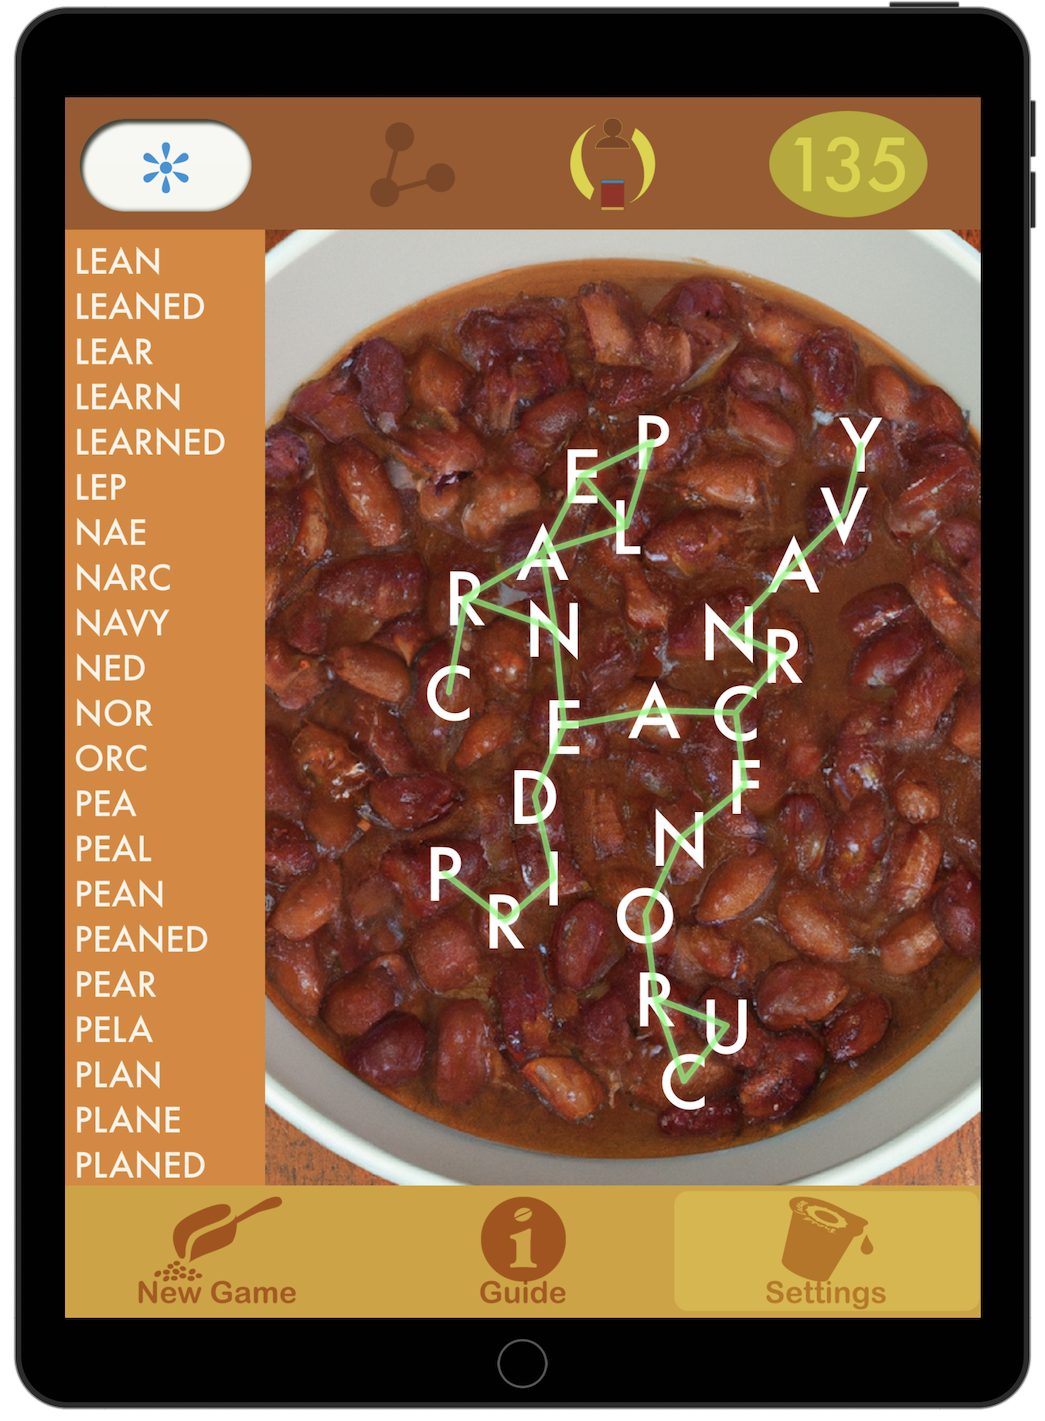 Chili Spell user screenshot showing connecting lines